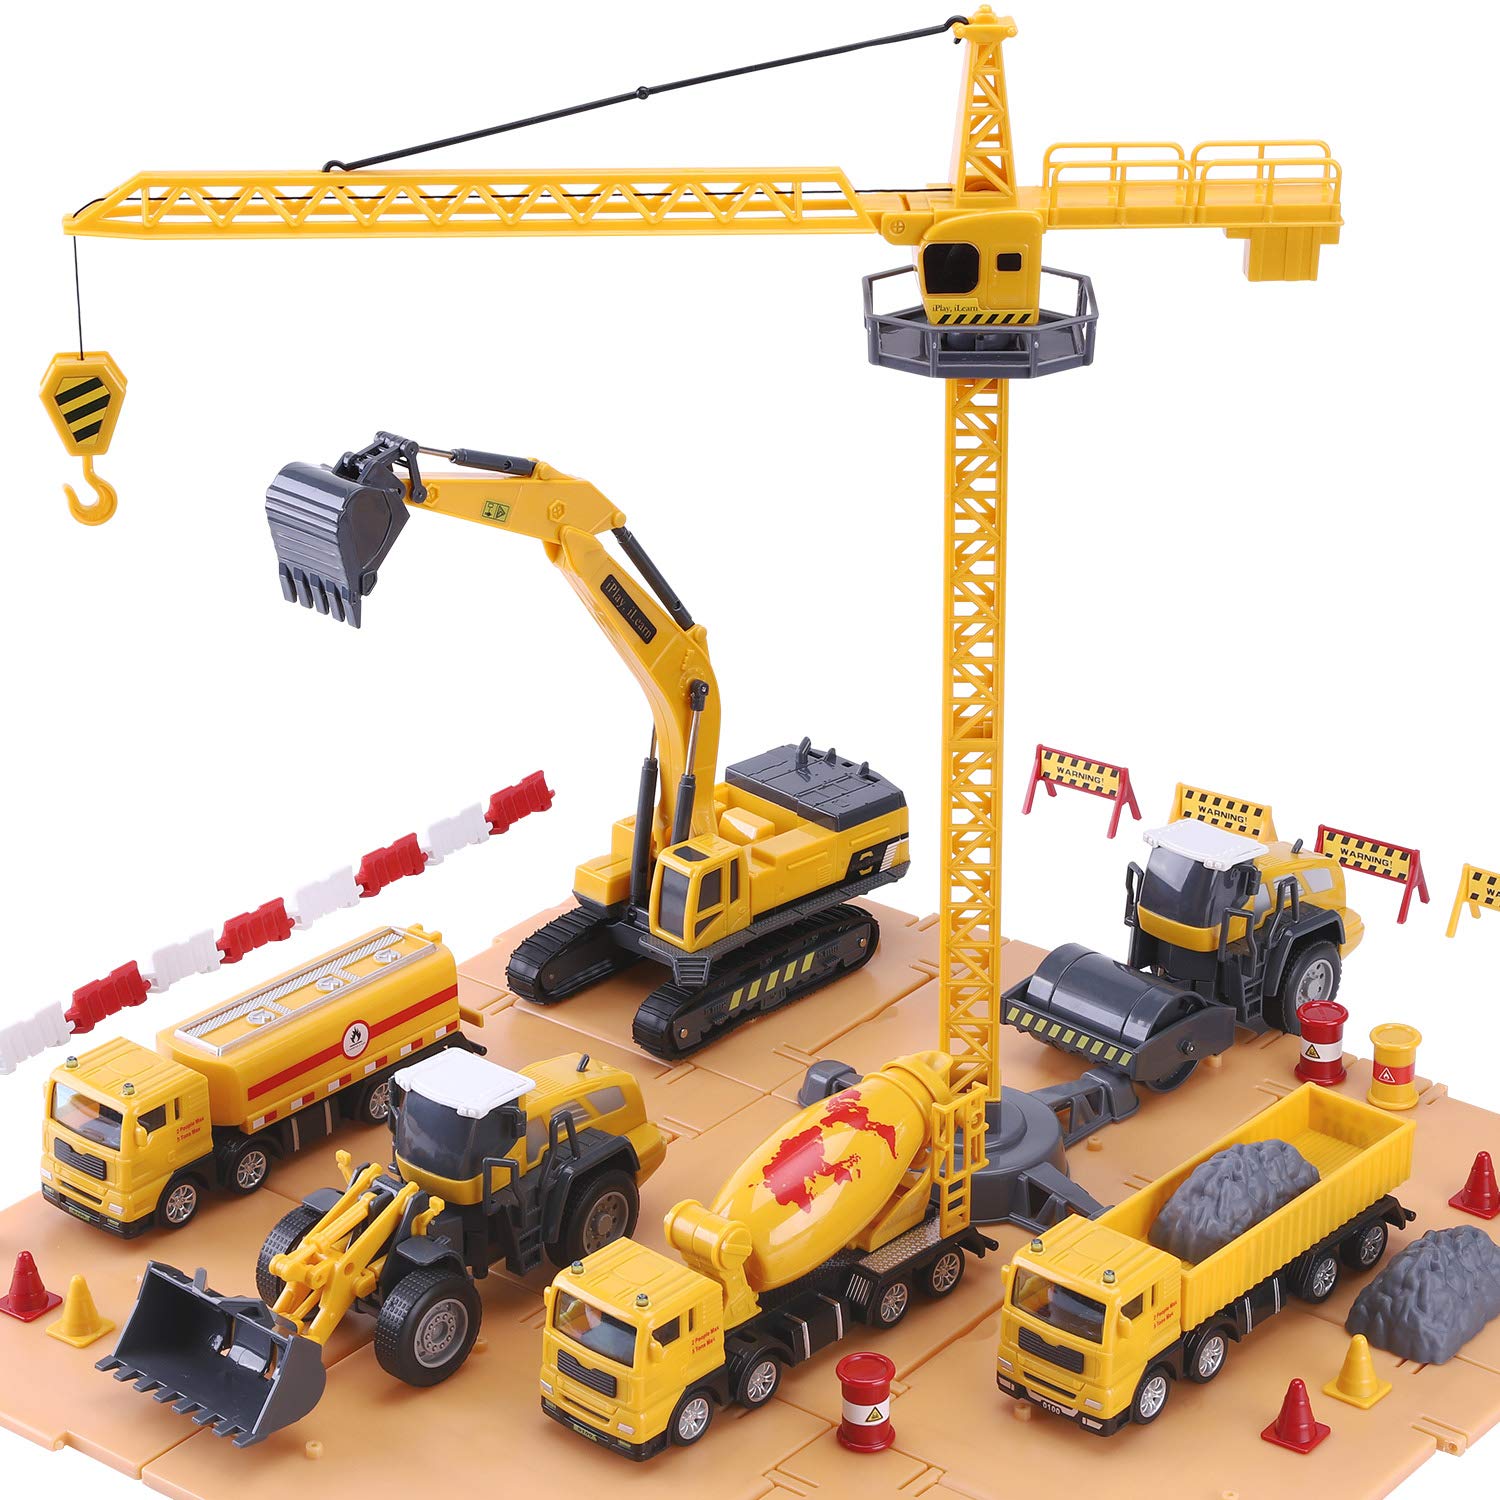 iPlay, iLearn Construction Site Vehicles Toy Set, Kids Engineering Playset, Tractor, Digger, Crane, Dump Trucks, Excavator, Cement, Steamroller, Birthday Gift for 3 4 5 Year Old Toddlers Boys Children